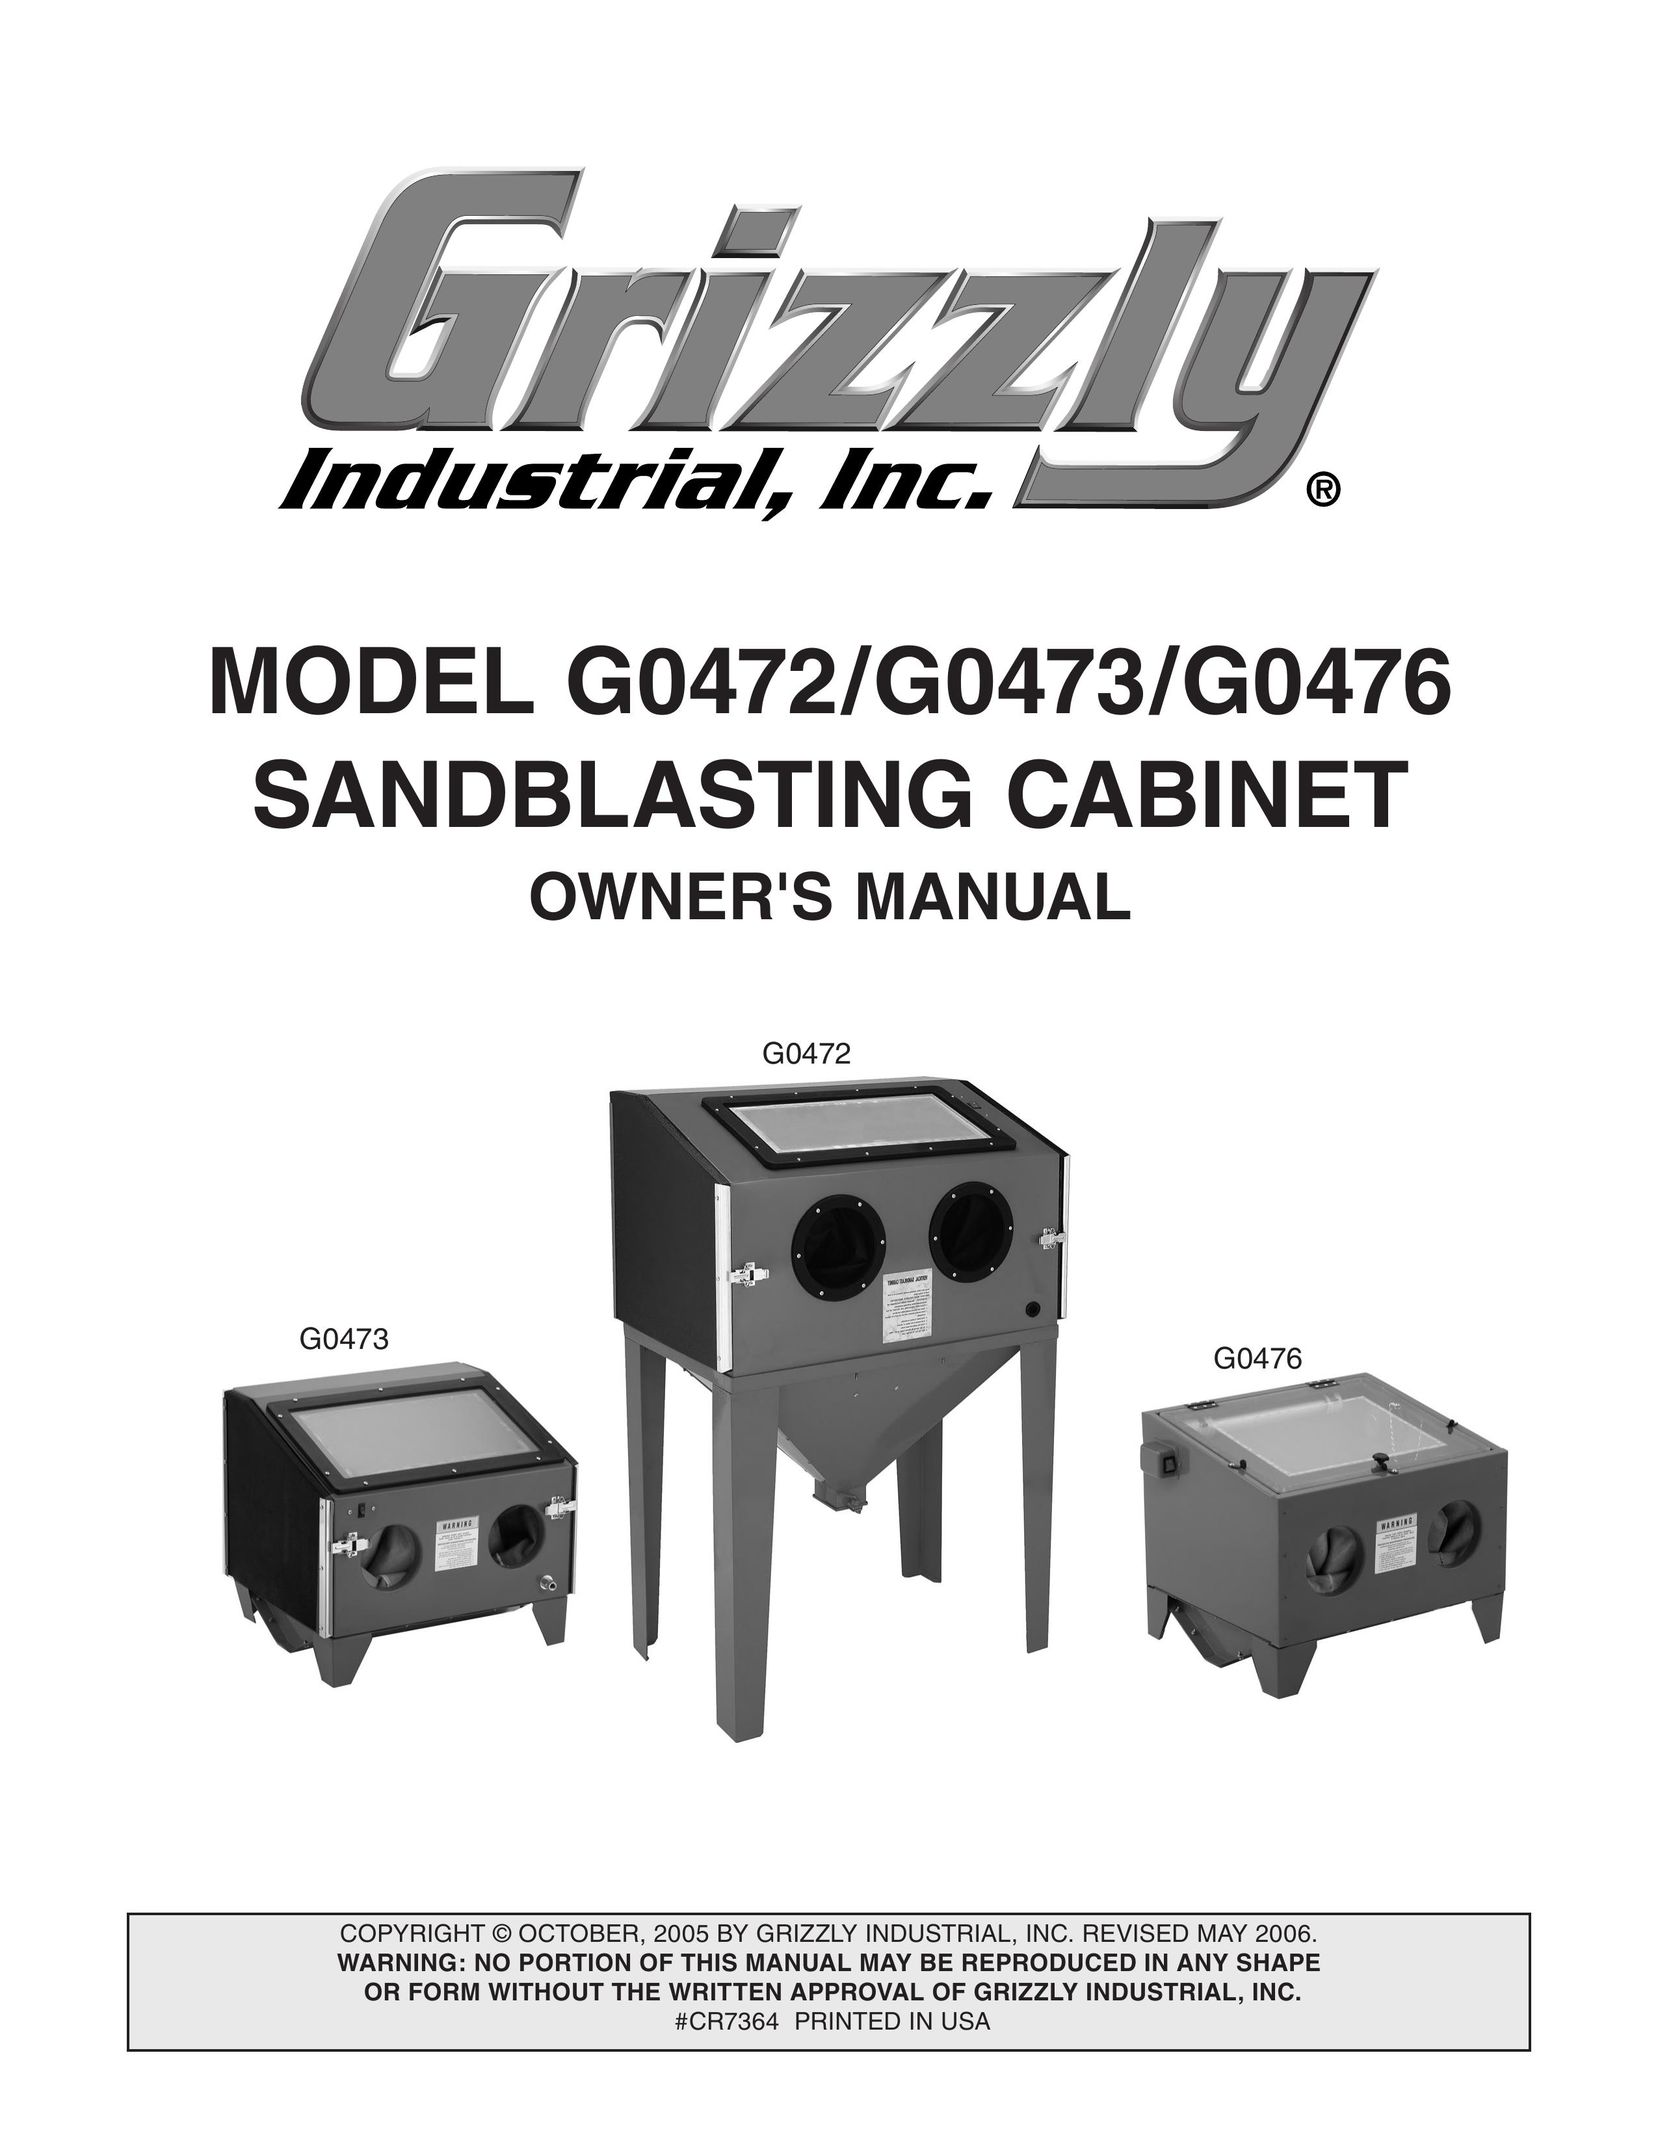 Grizzly G0476 Sander User Manual